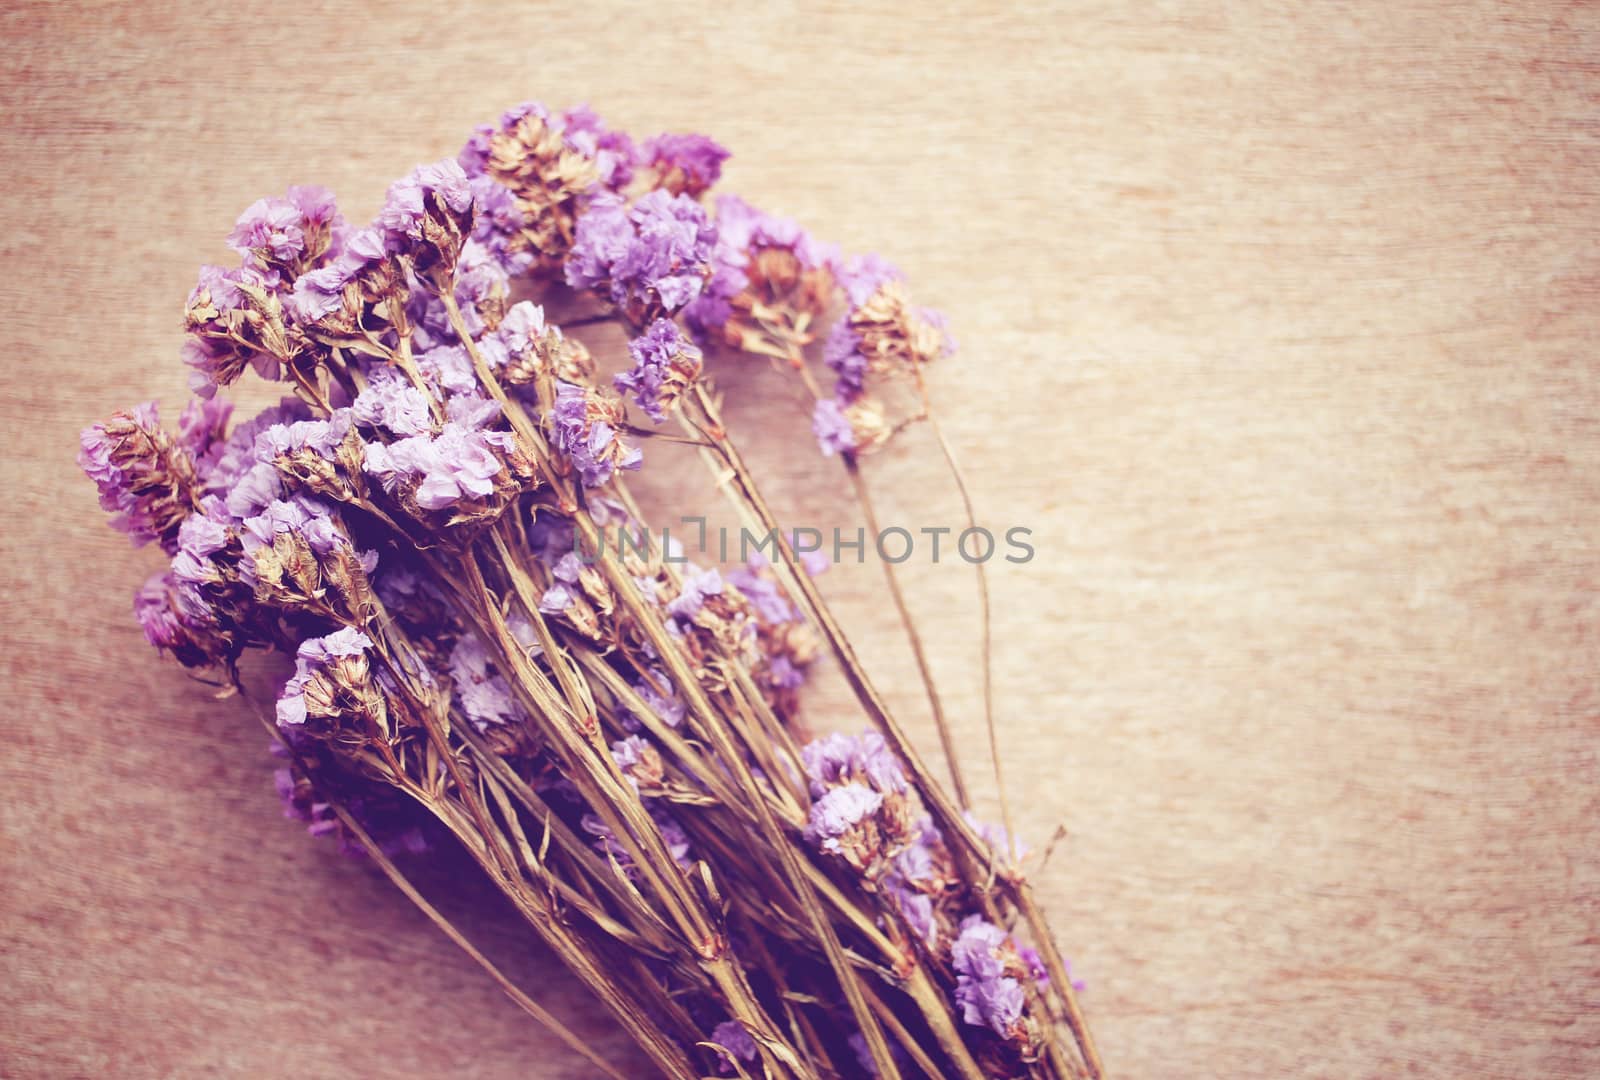 Statice flowers on wooden background with retro filter effect